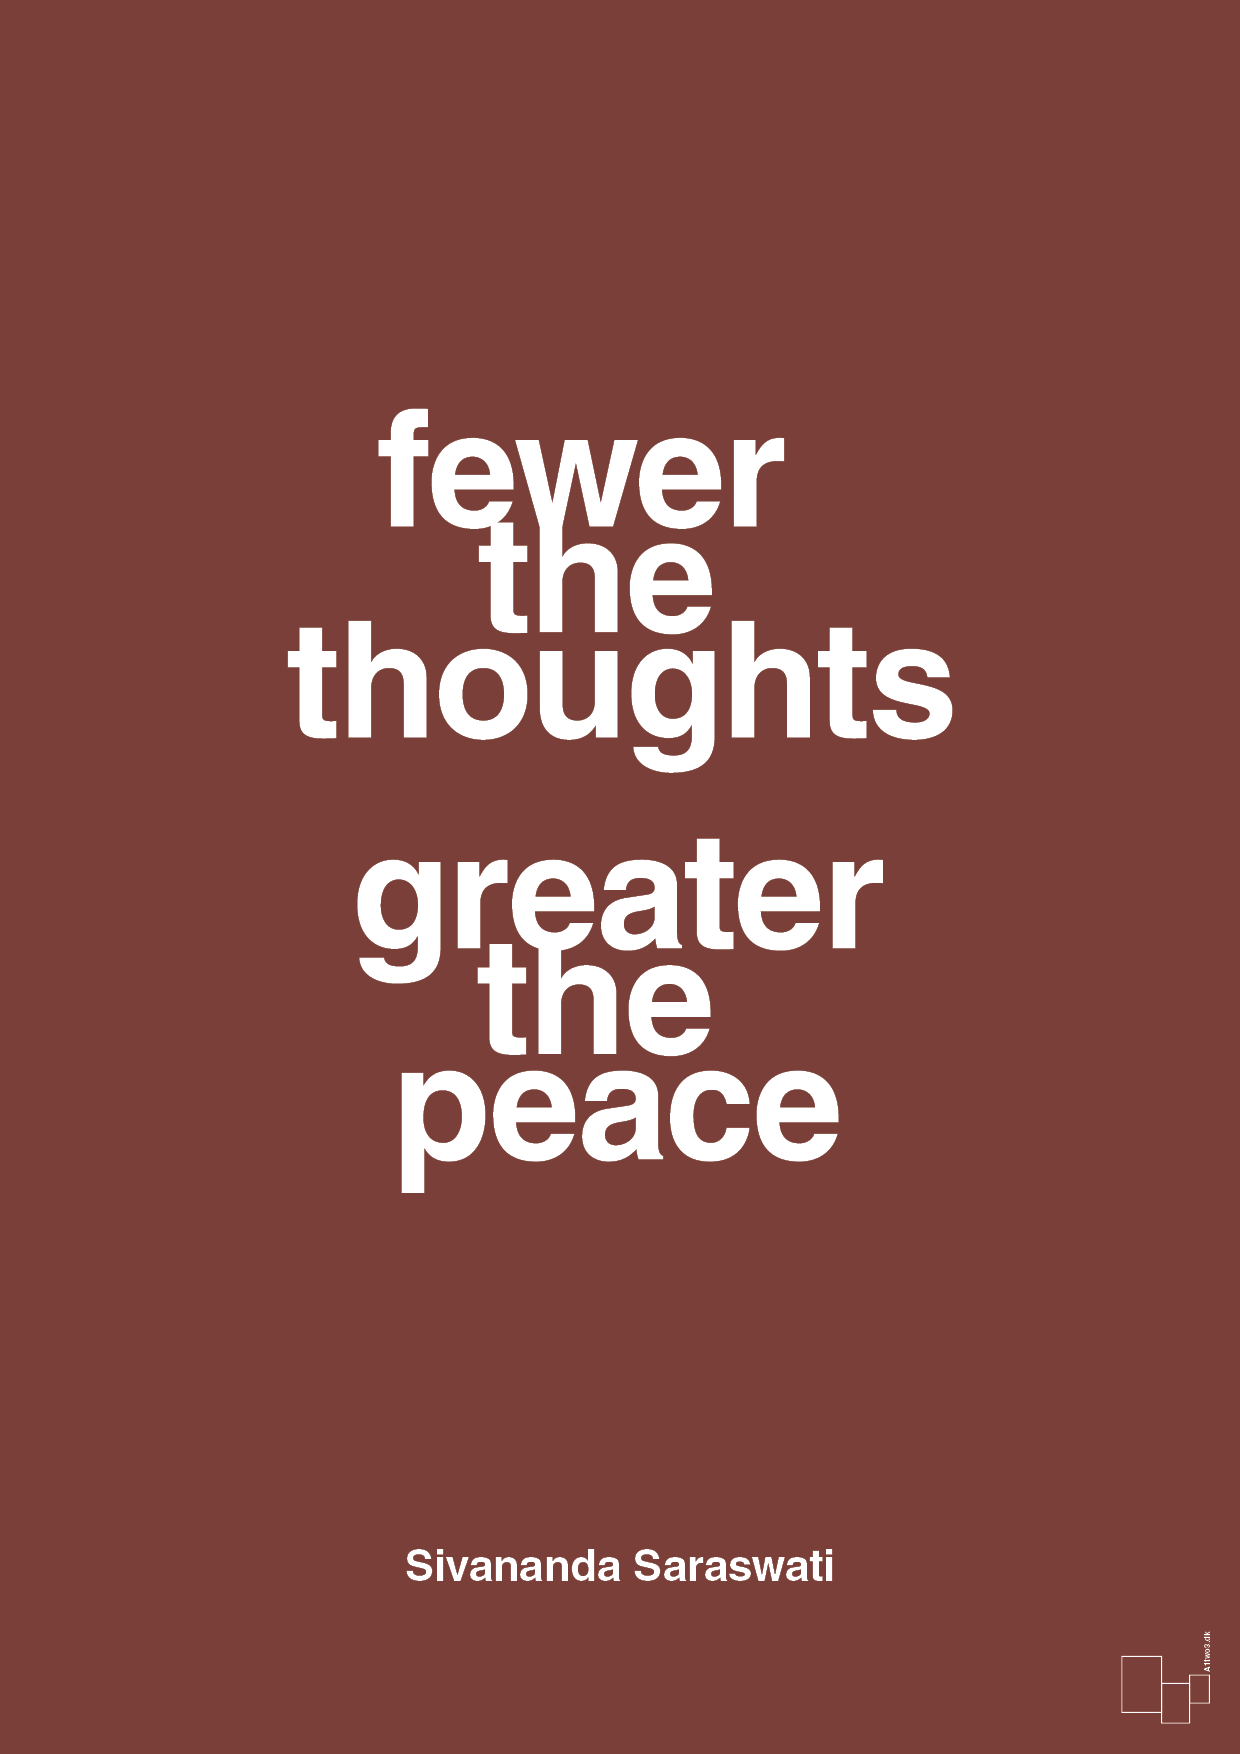 fewer the thoughts greater the peace - Plakat med Citater i Red Pepper